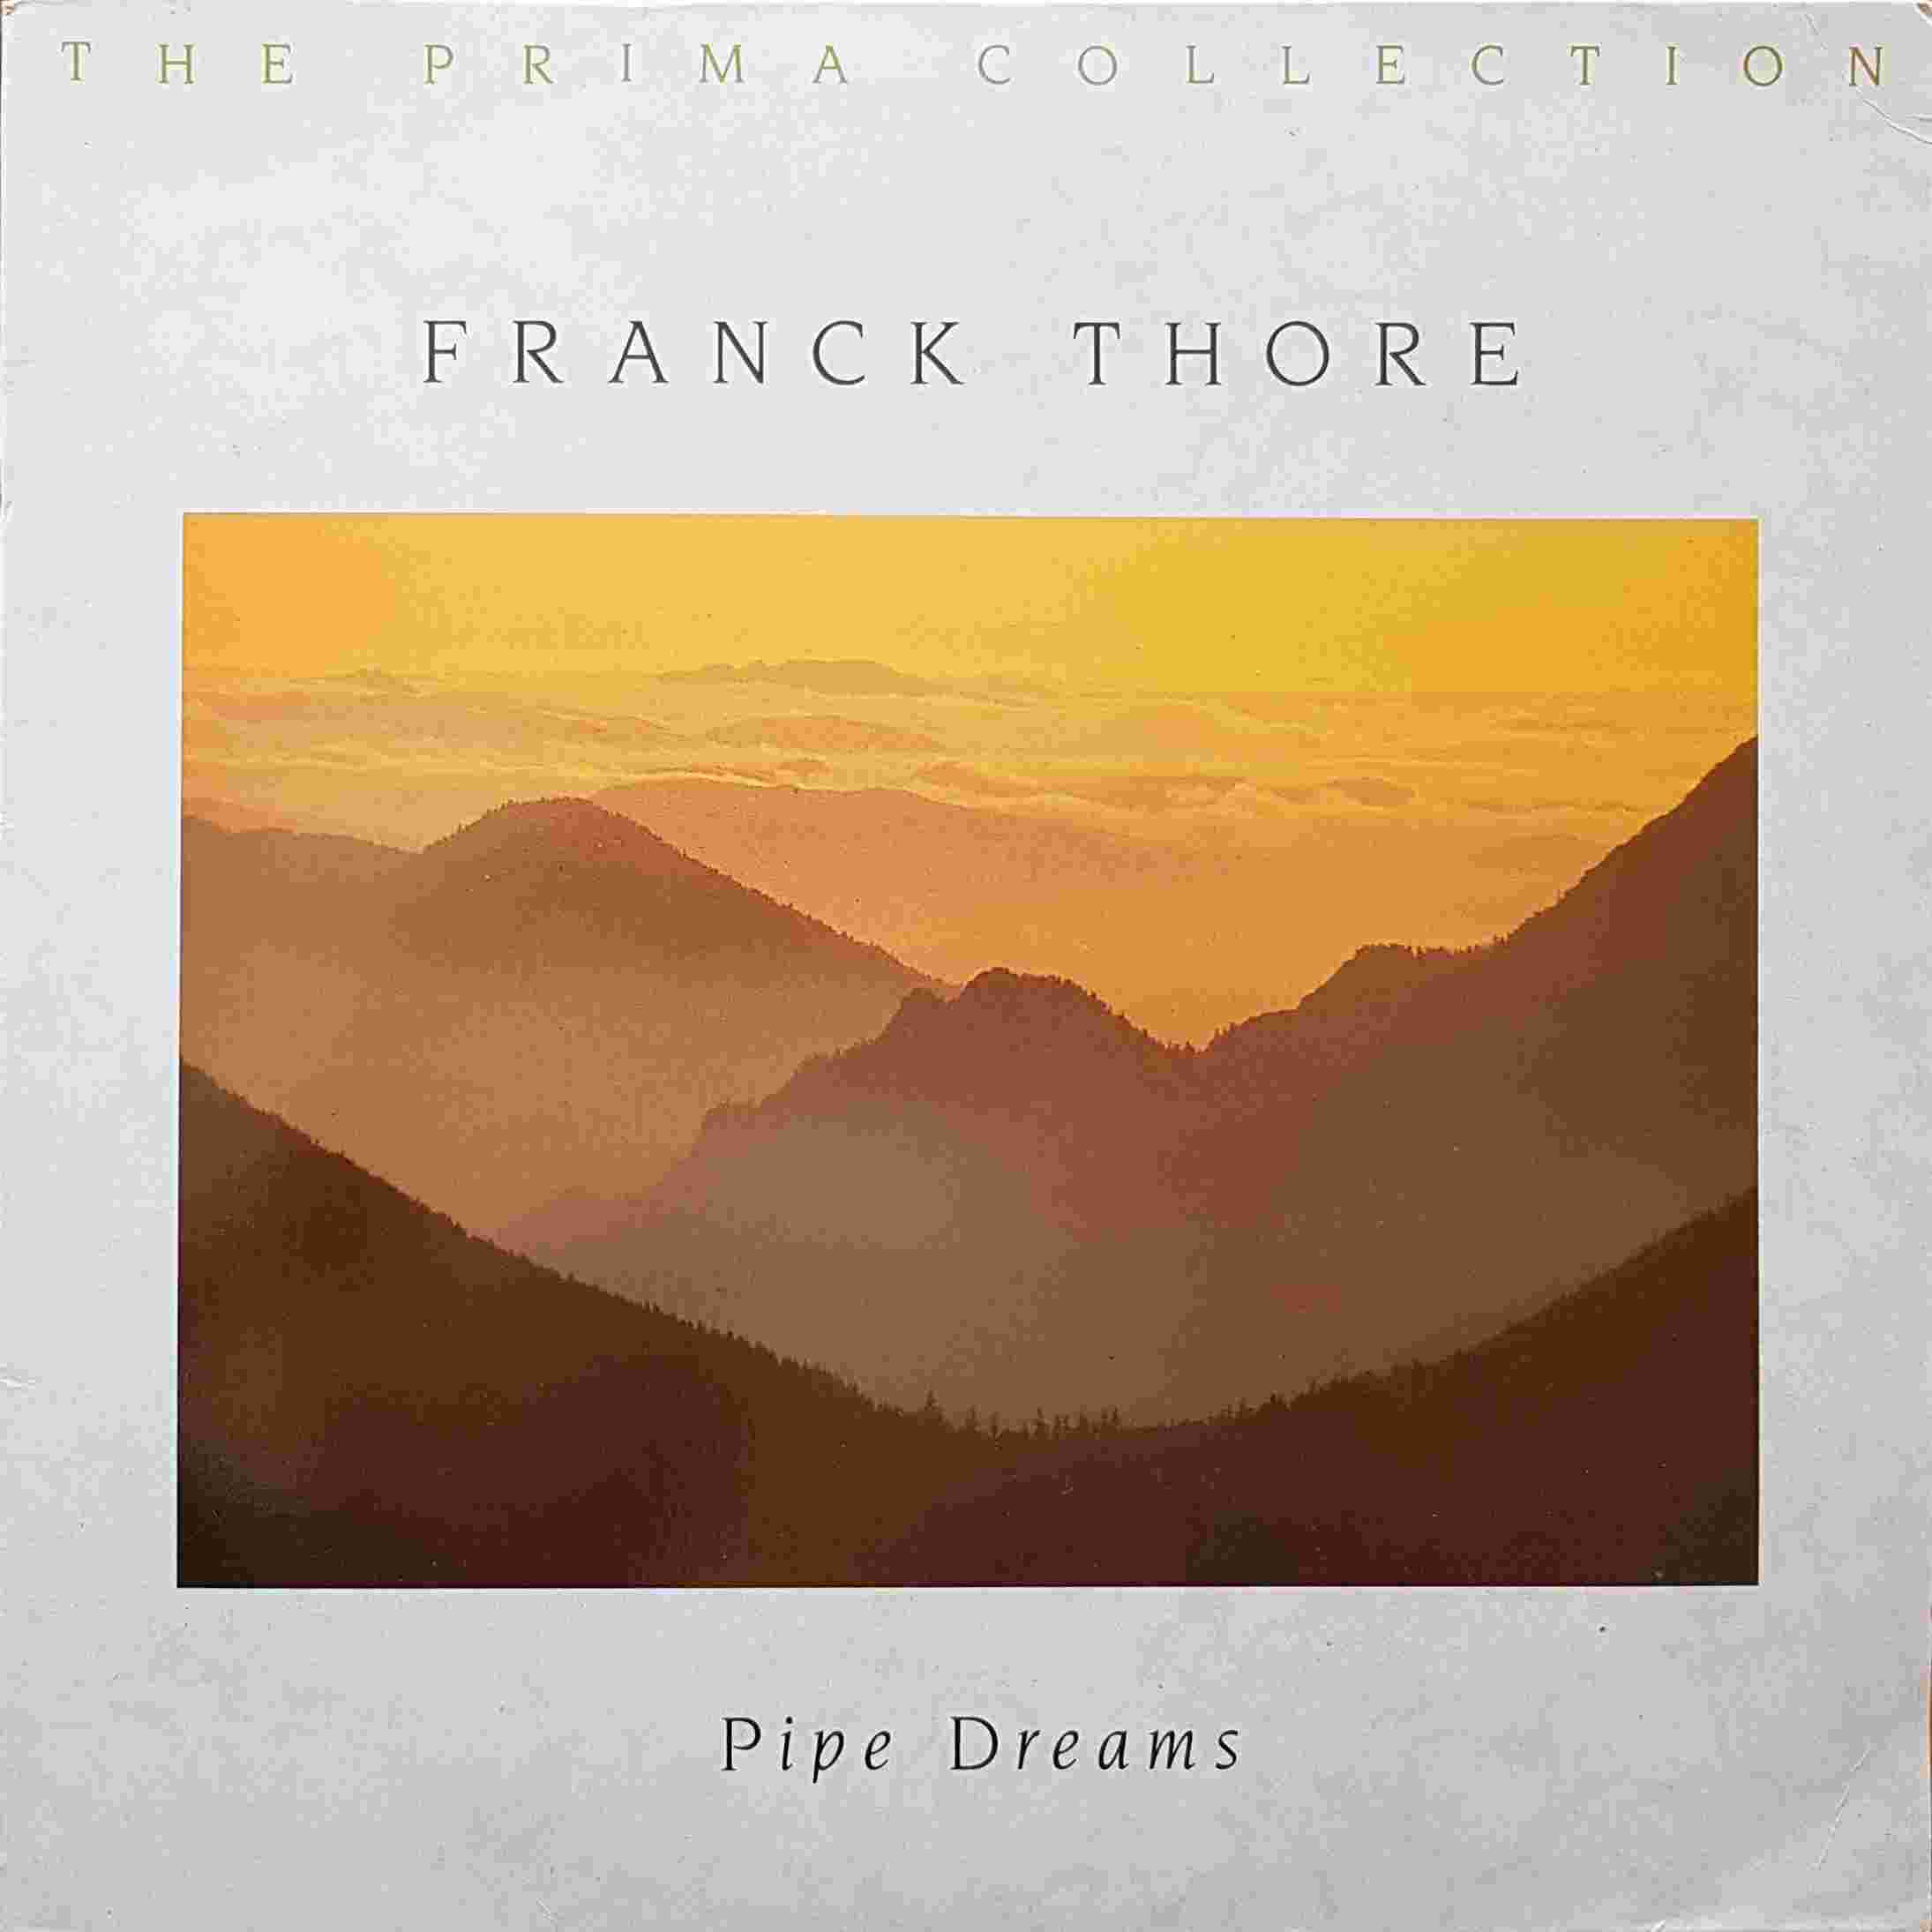 Picture of PRIM 6002 Pipe dreams - Franck Thore by artist Frank Thore from the BBC albums - Records and Tapes library